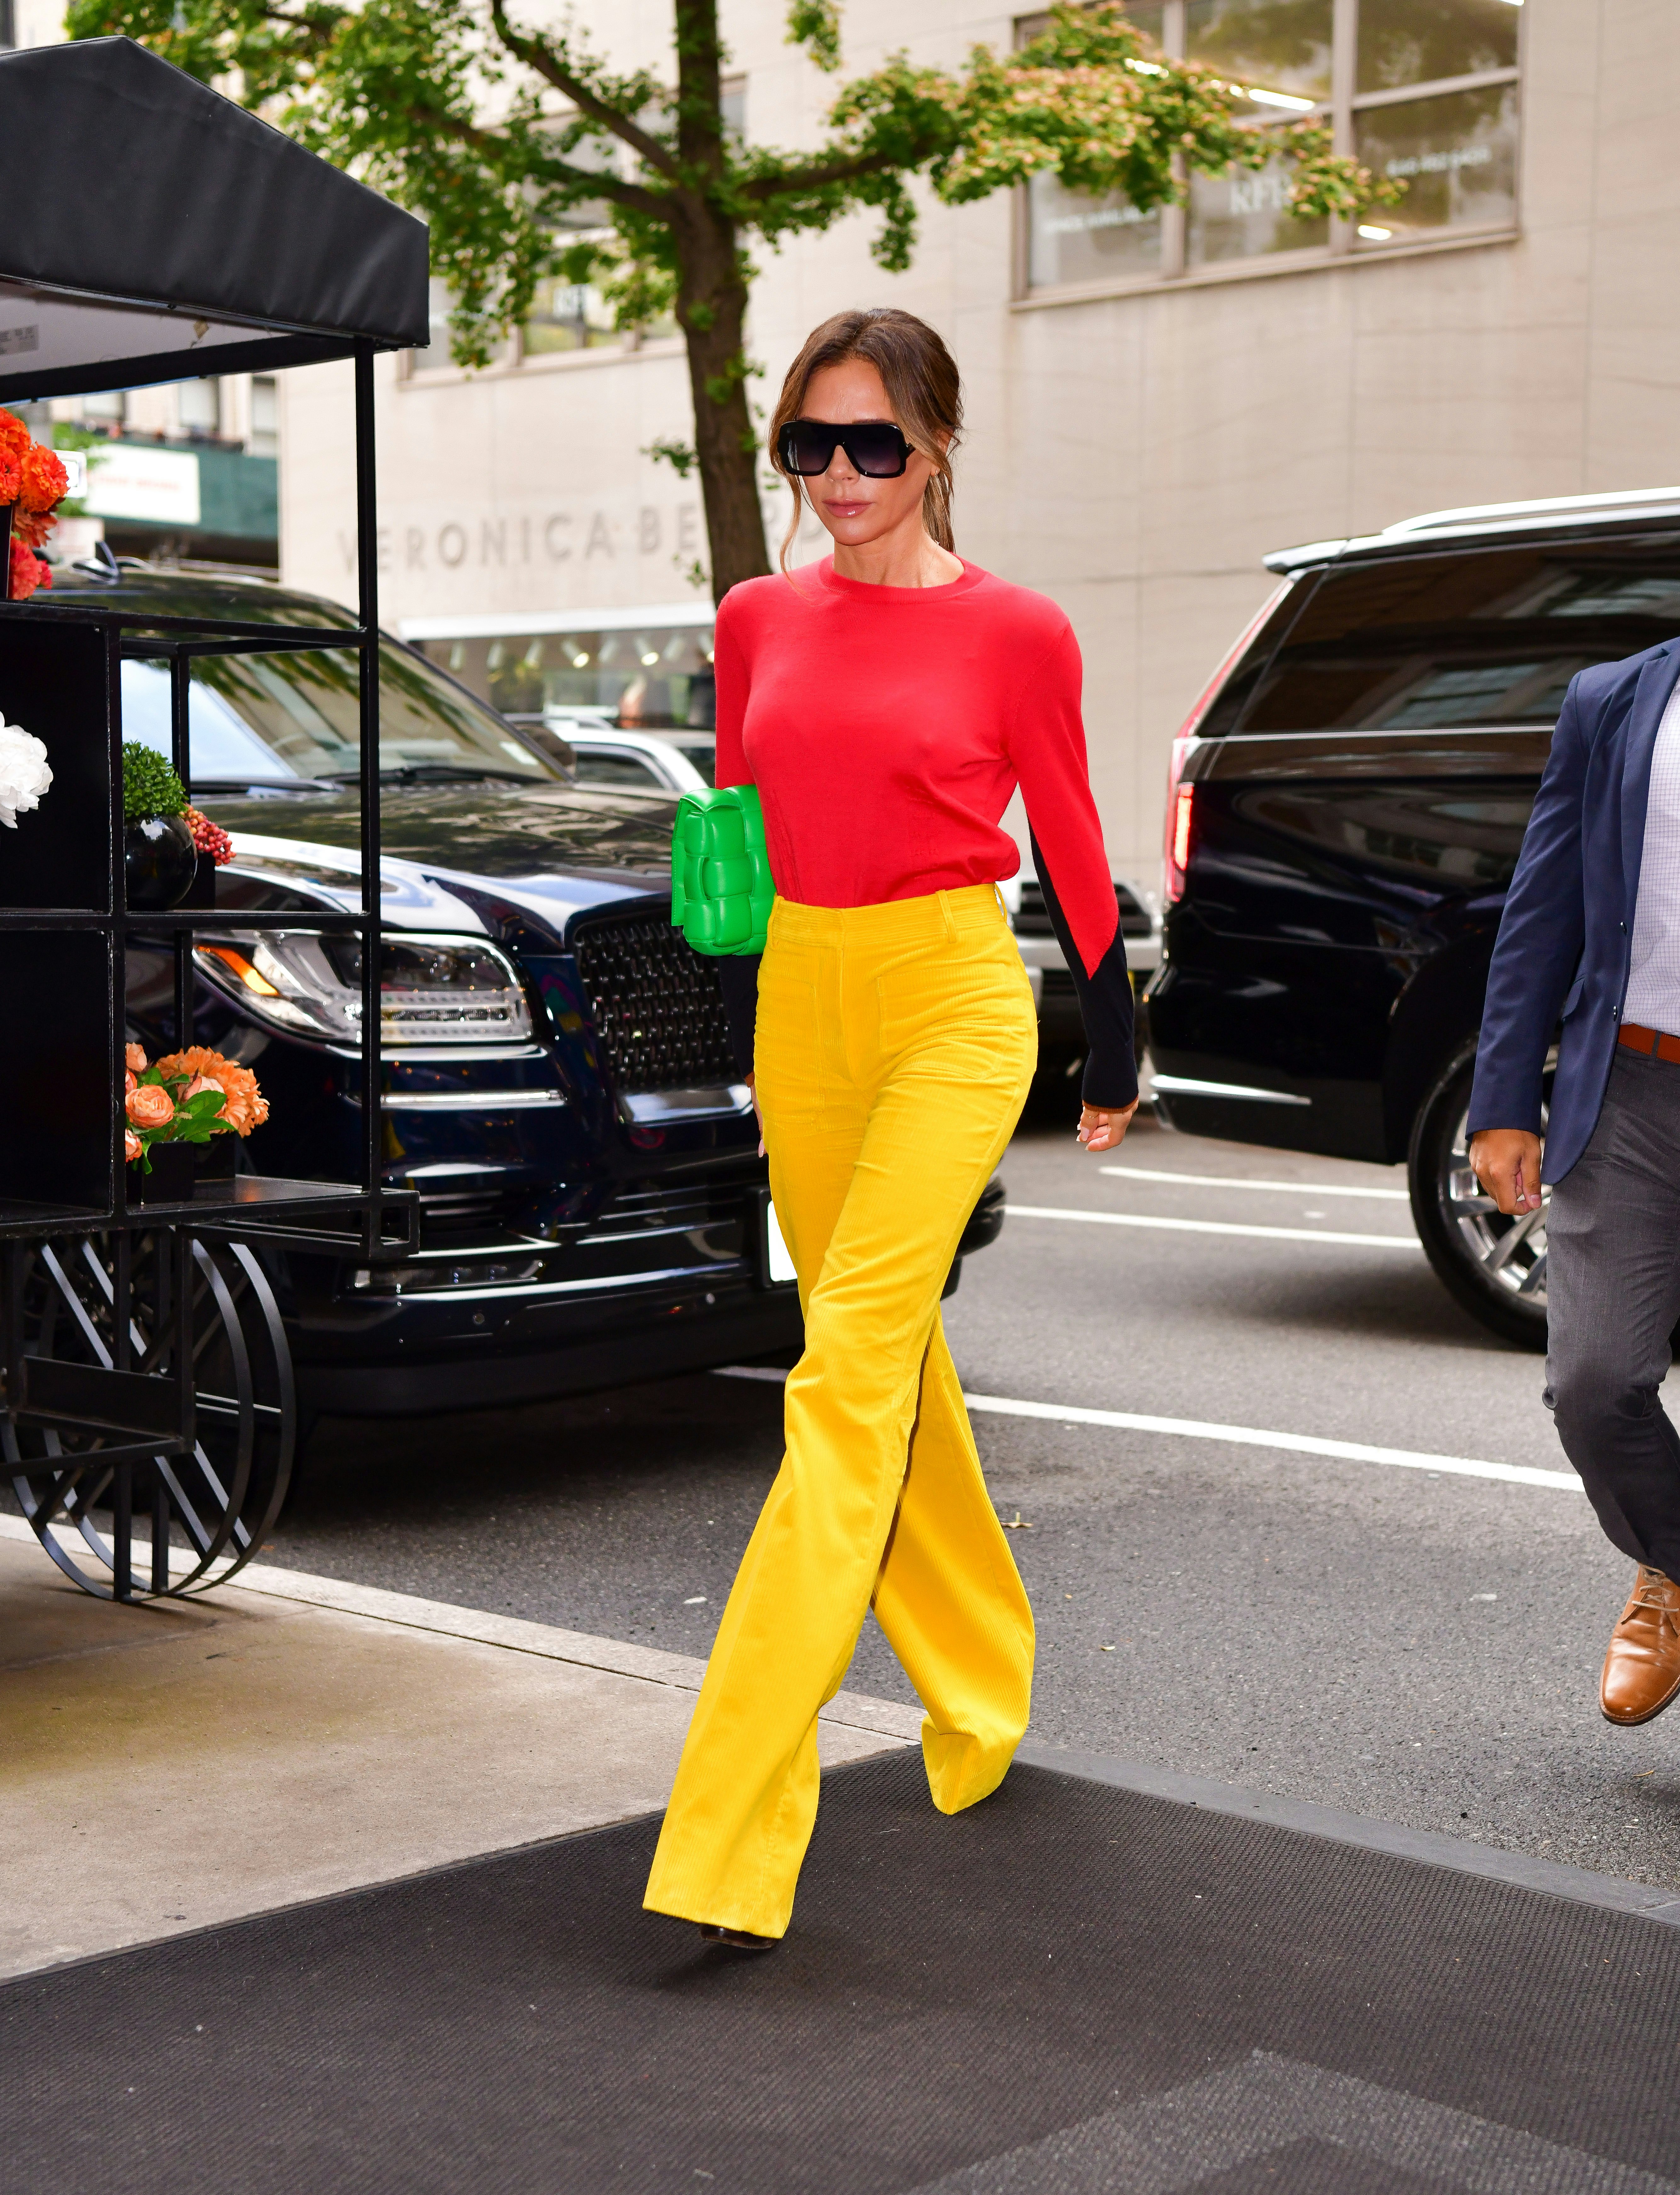 Victoria Beckham Steps Out in the Girlish Alternative to WideLeg Pants   Vogue